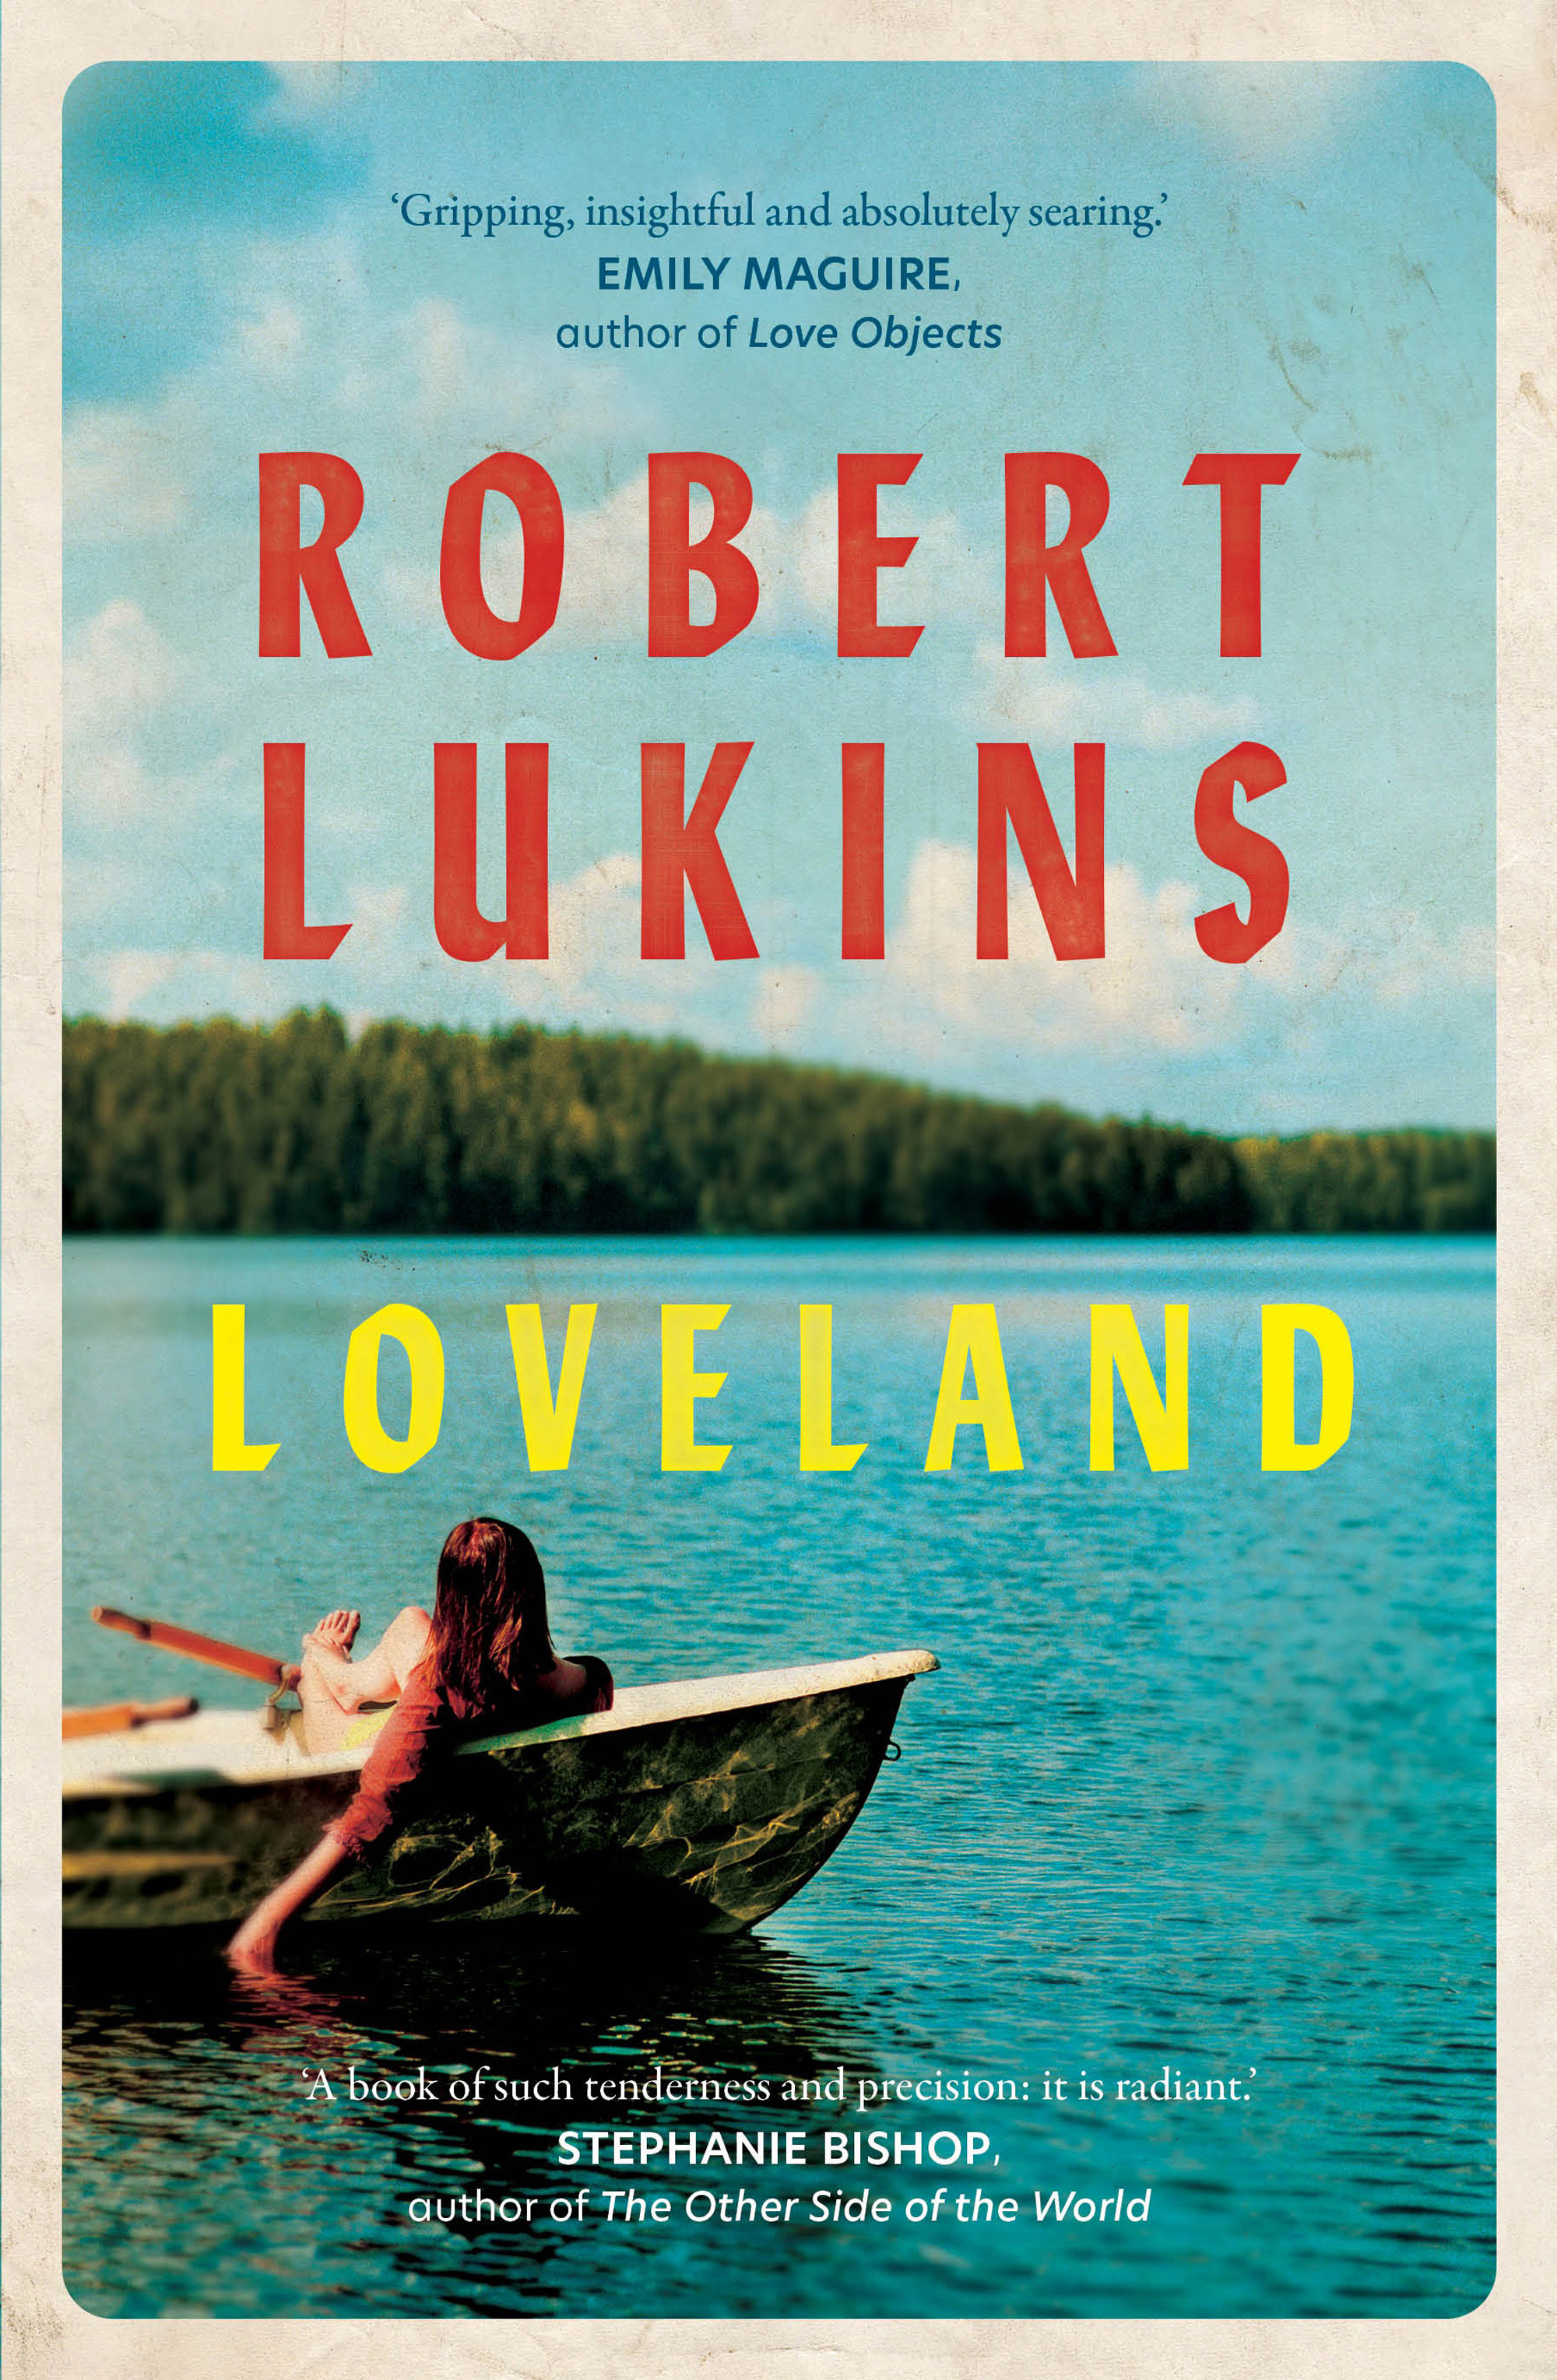 Cover of Loveland by Robert Lukins published March 2022